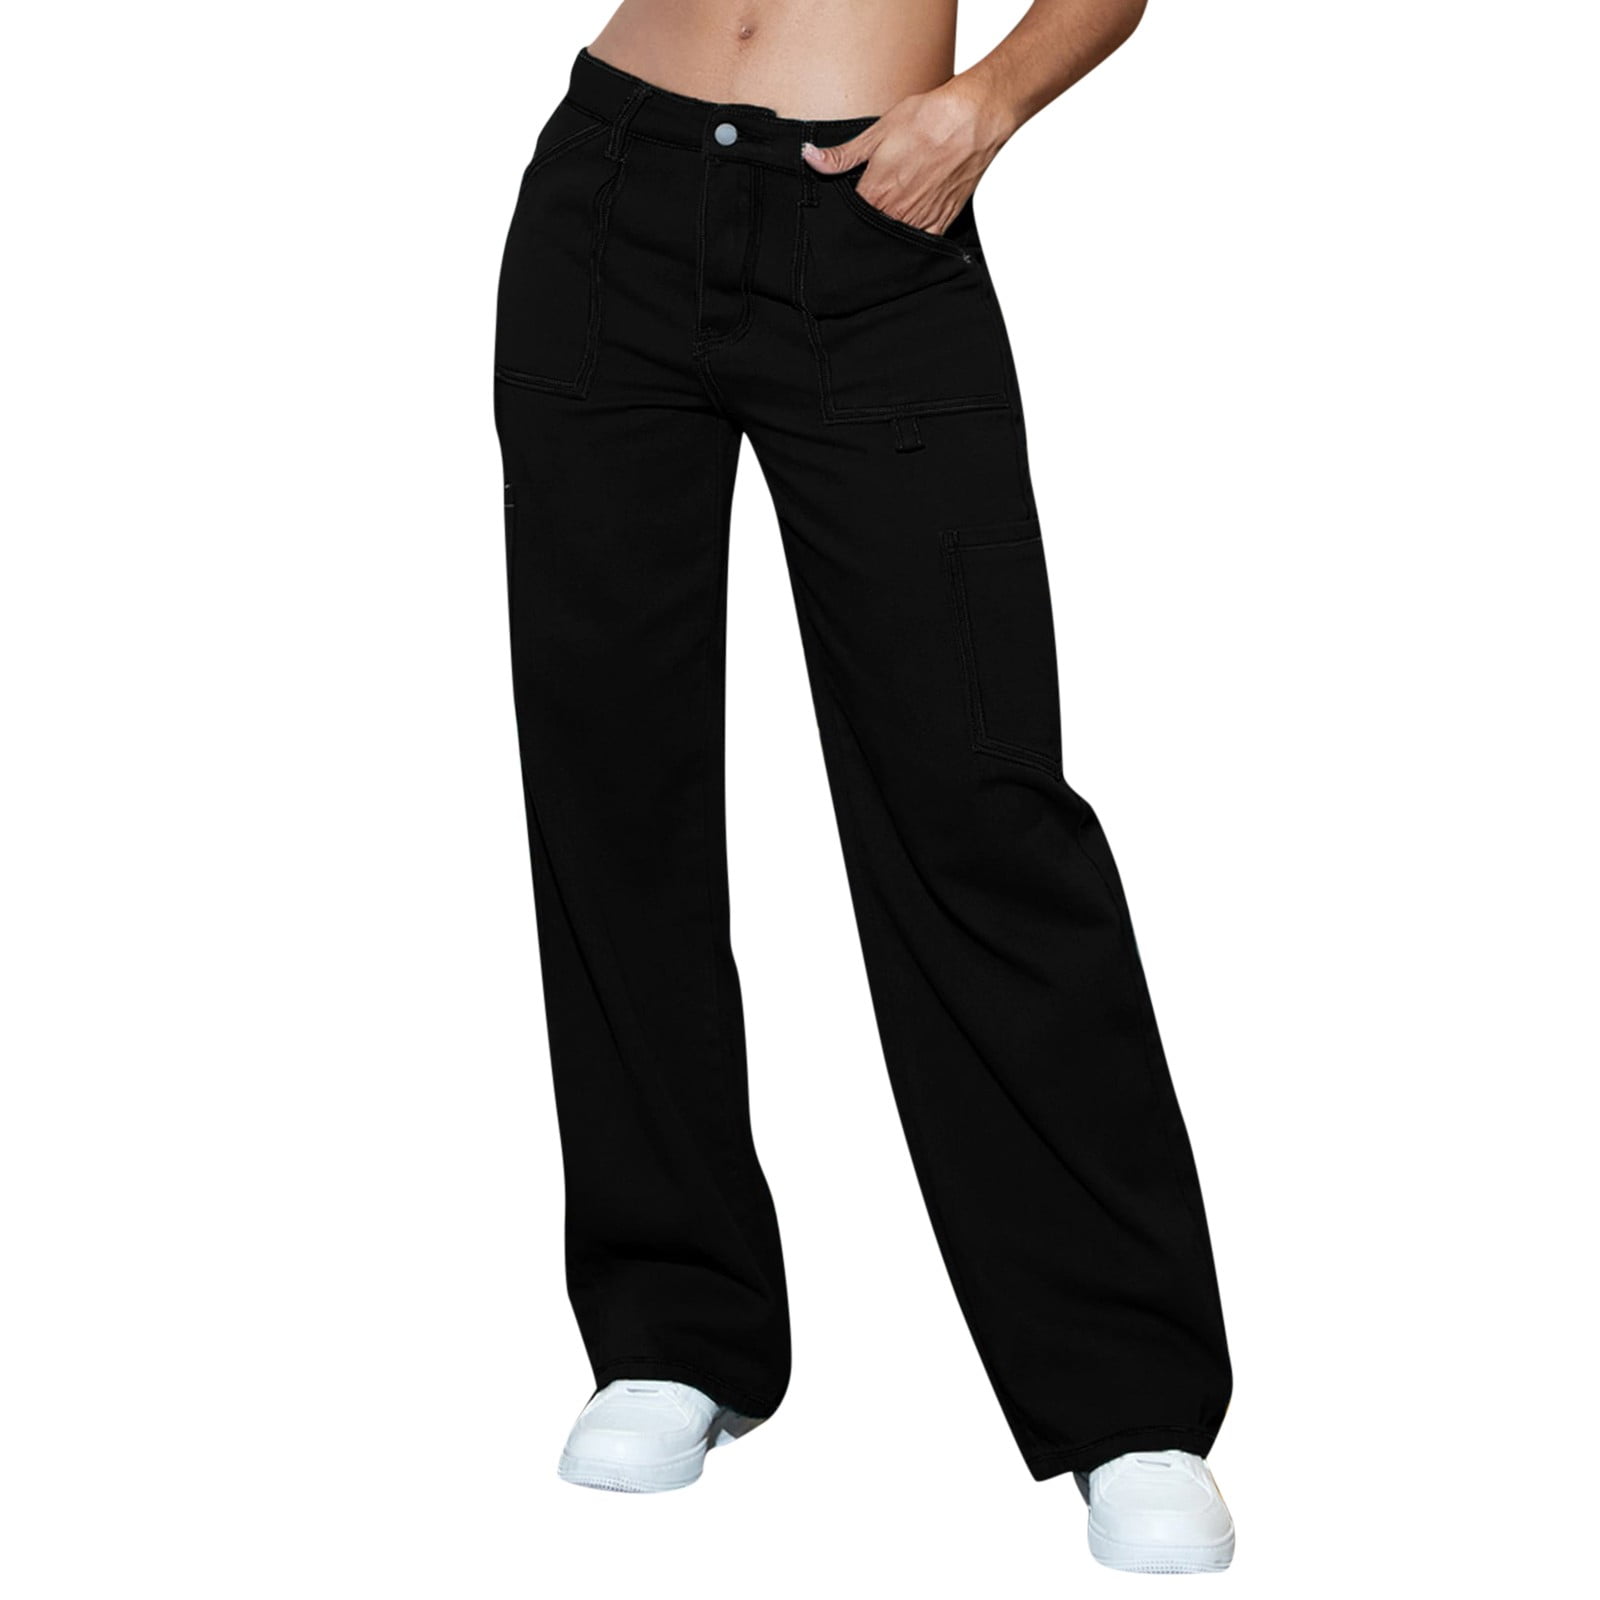 Tiqkatyck Work pants Women, Relaxed Fit Baggy Clothes Black Pants High  Waist Zipper Slim Drawstring Waist with Pockets Loose Plus Size Womans Pant